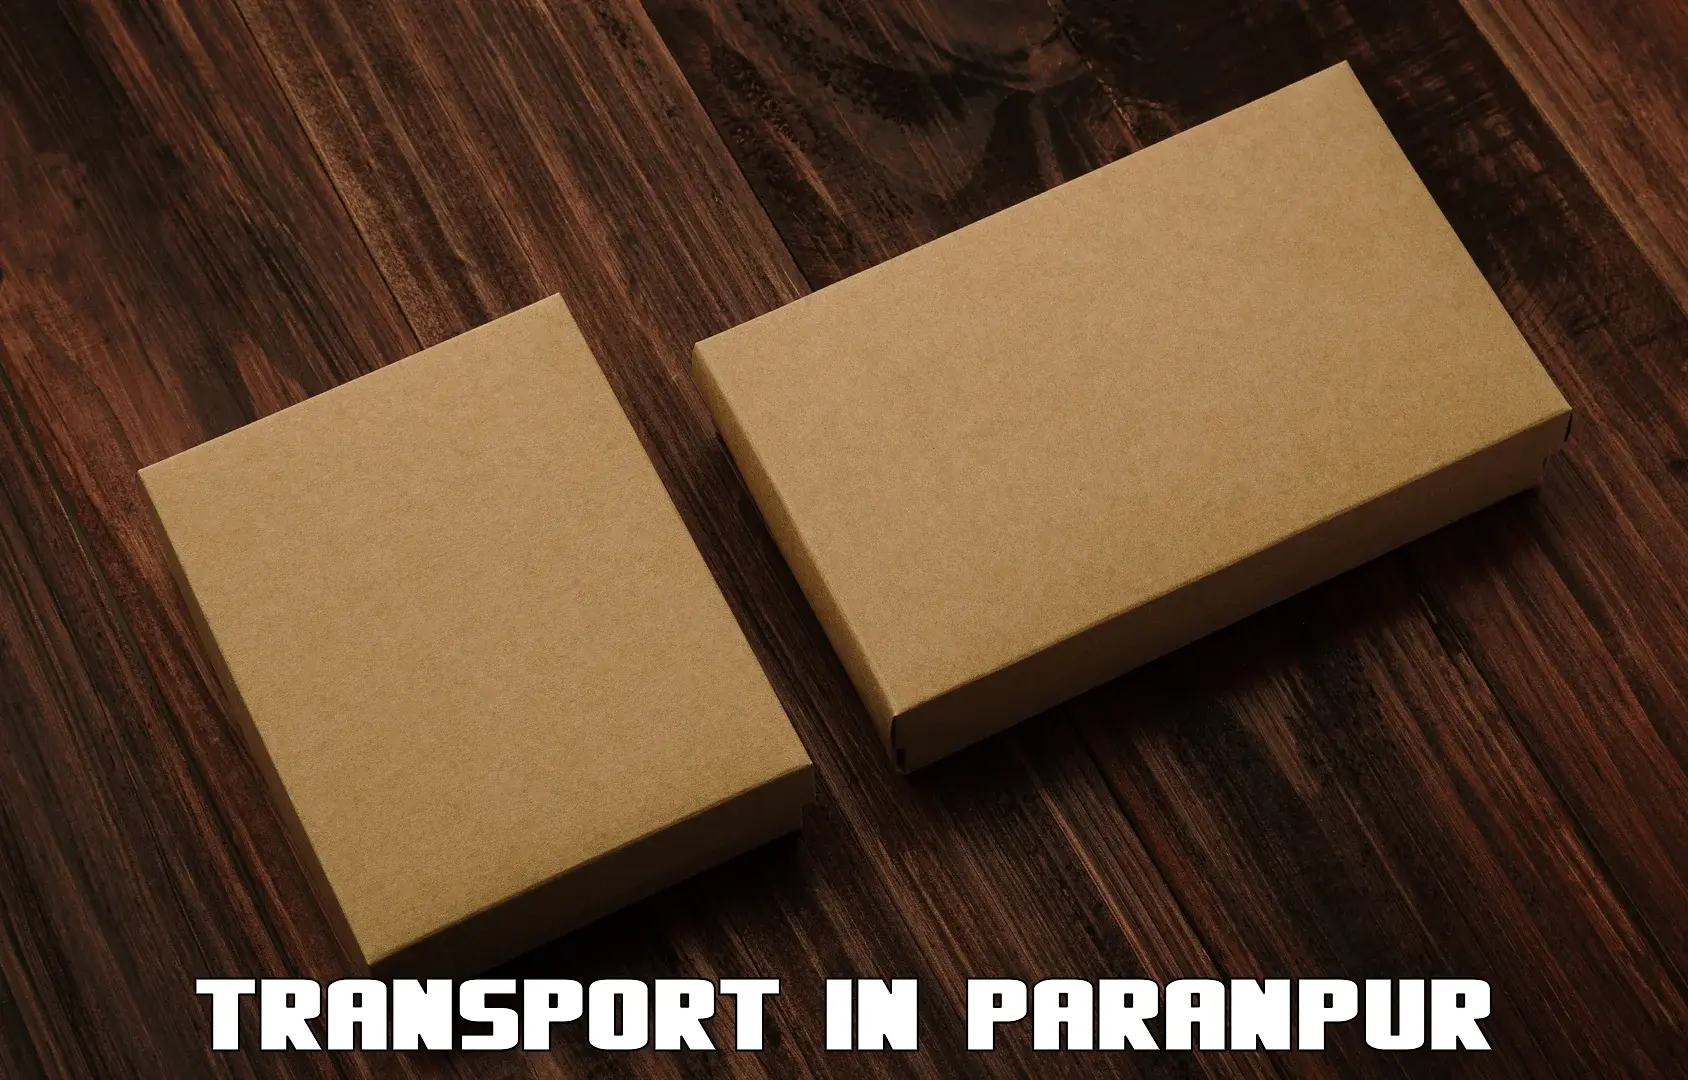 Two wheeler parcel service in Paranpur